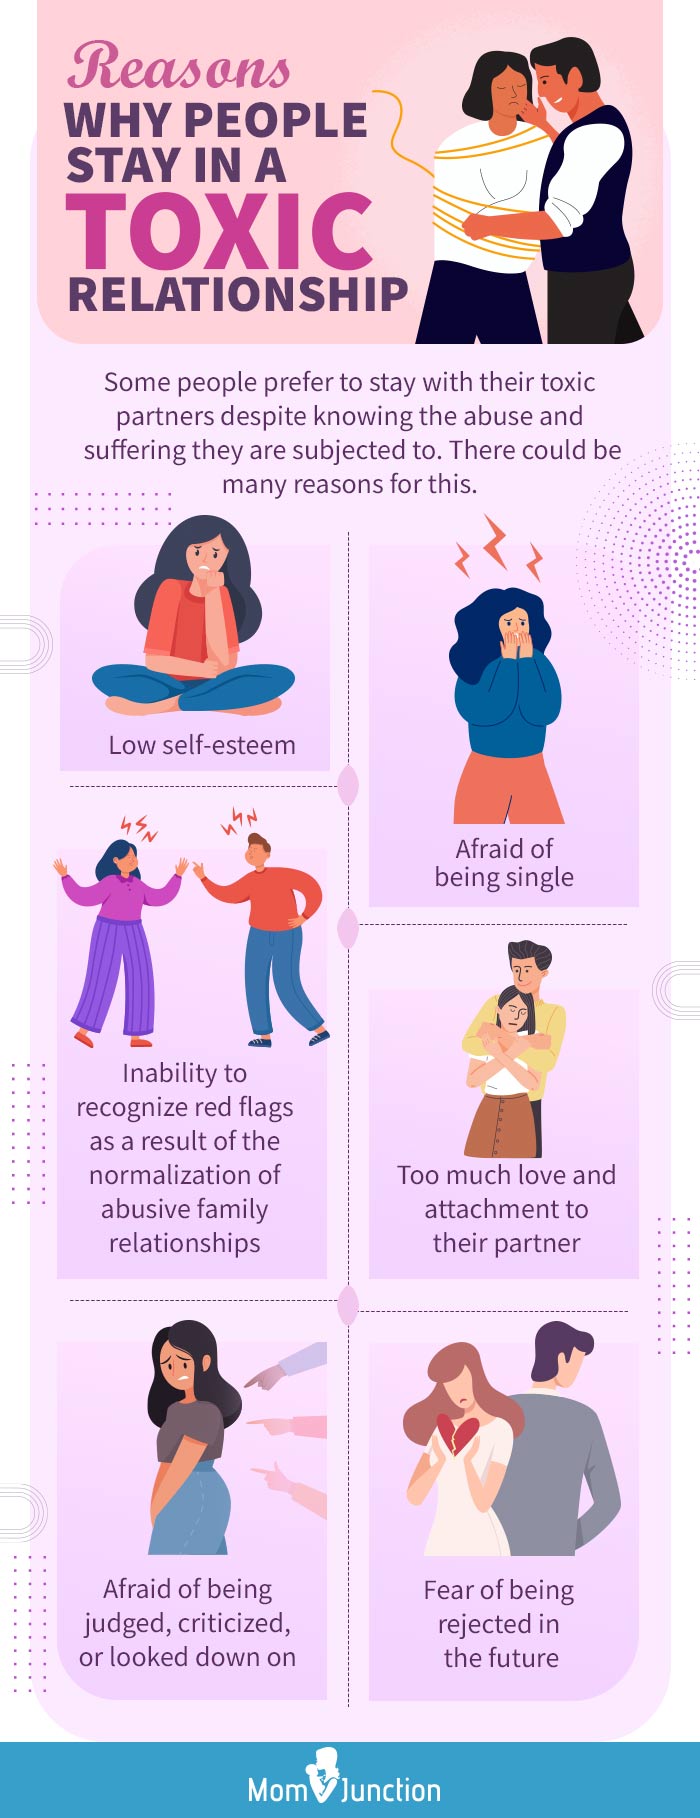 reasons why people stay in a toxic relationship (infographic)